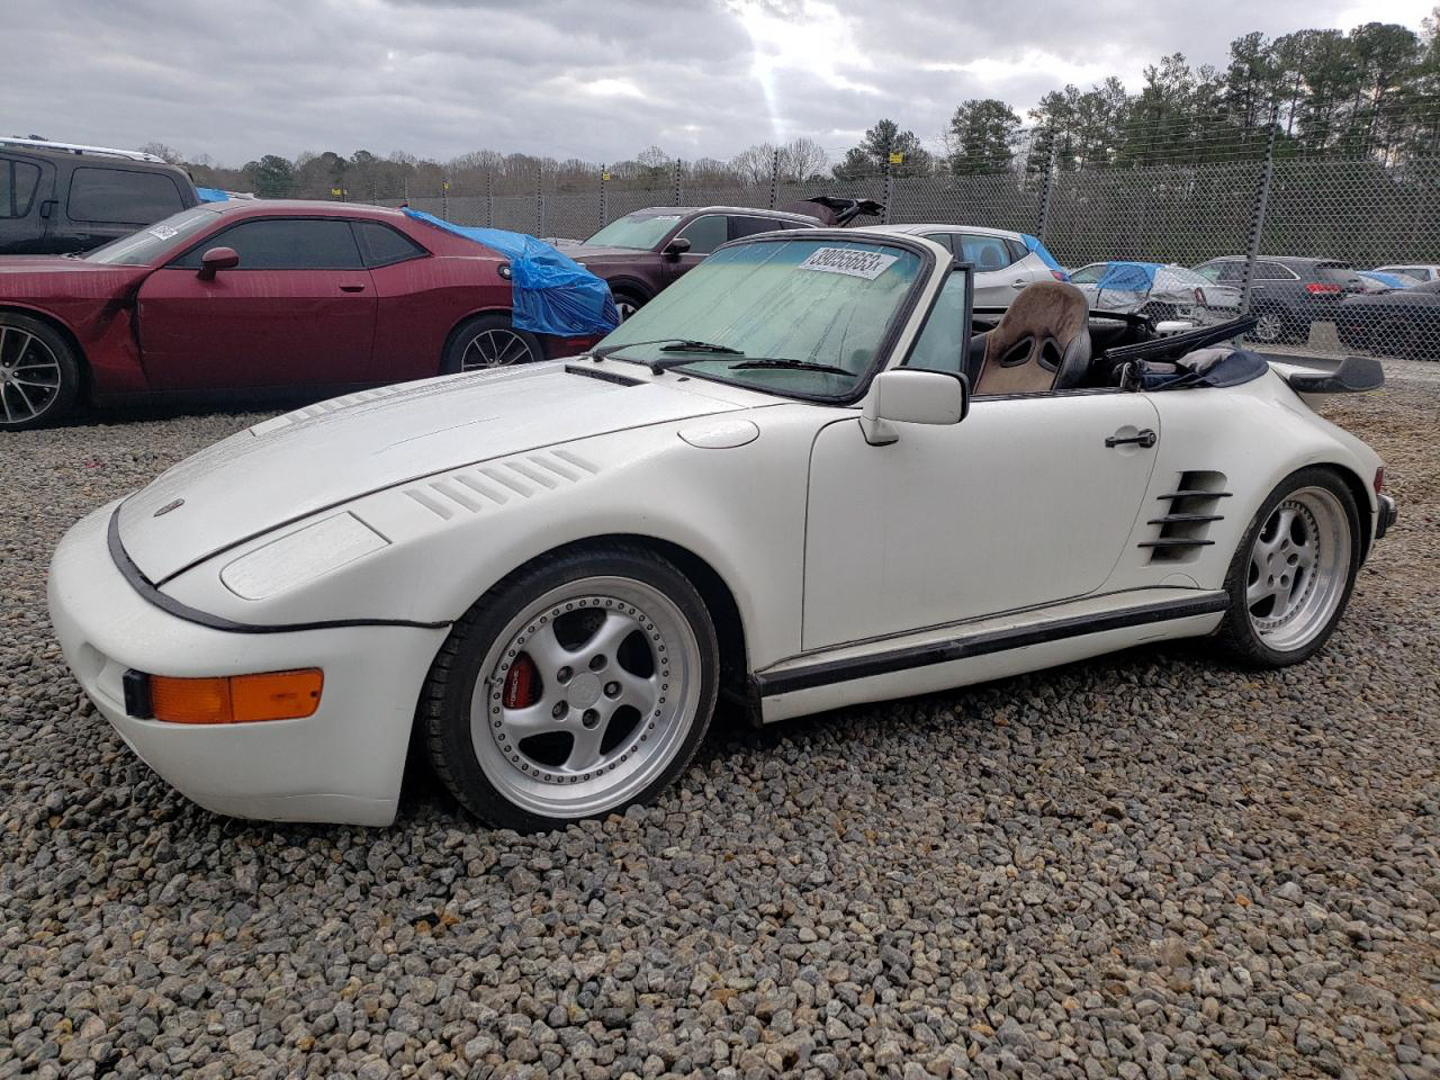 Will You Take a Chance on This Mysterious 1988 Porsche 911 Turbo Slant Nose on Copart?